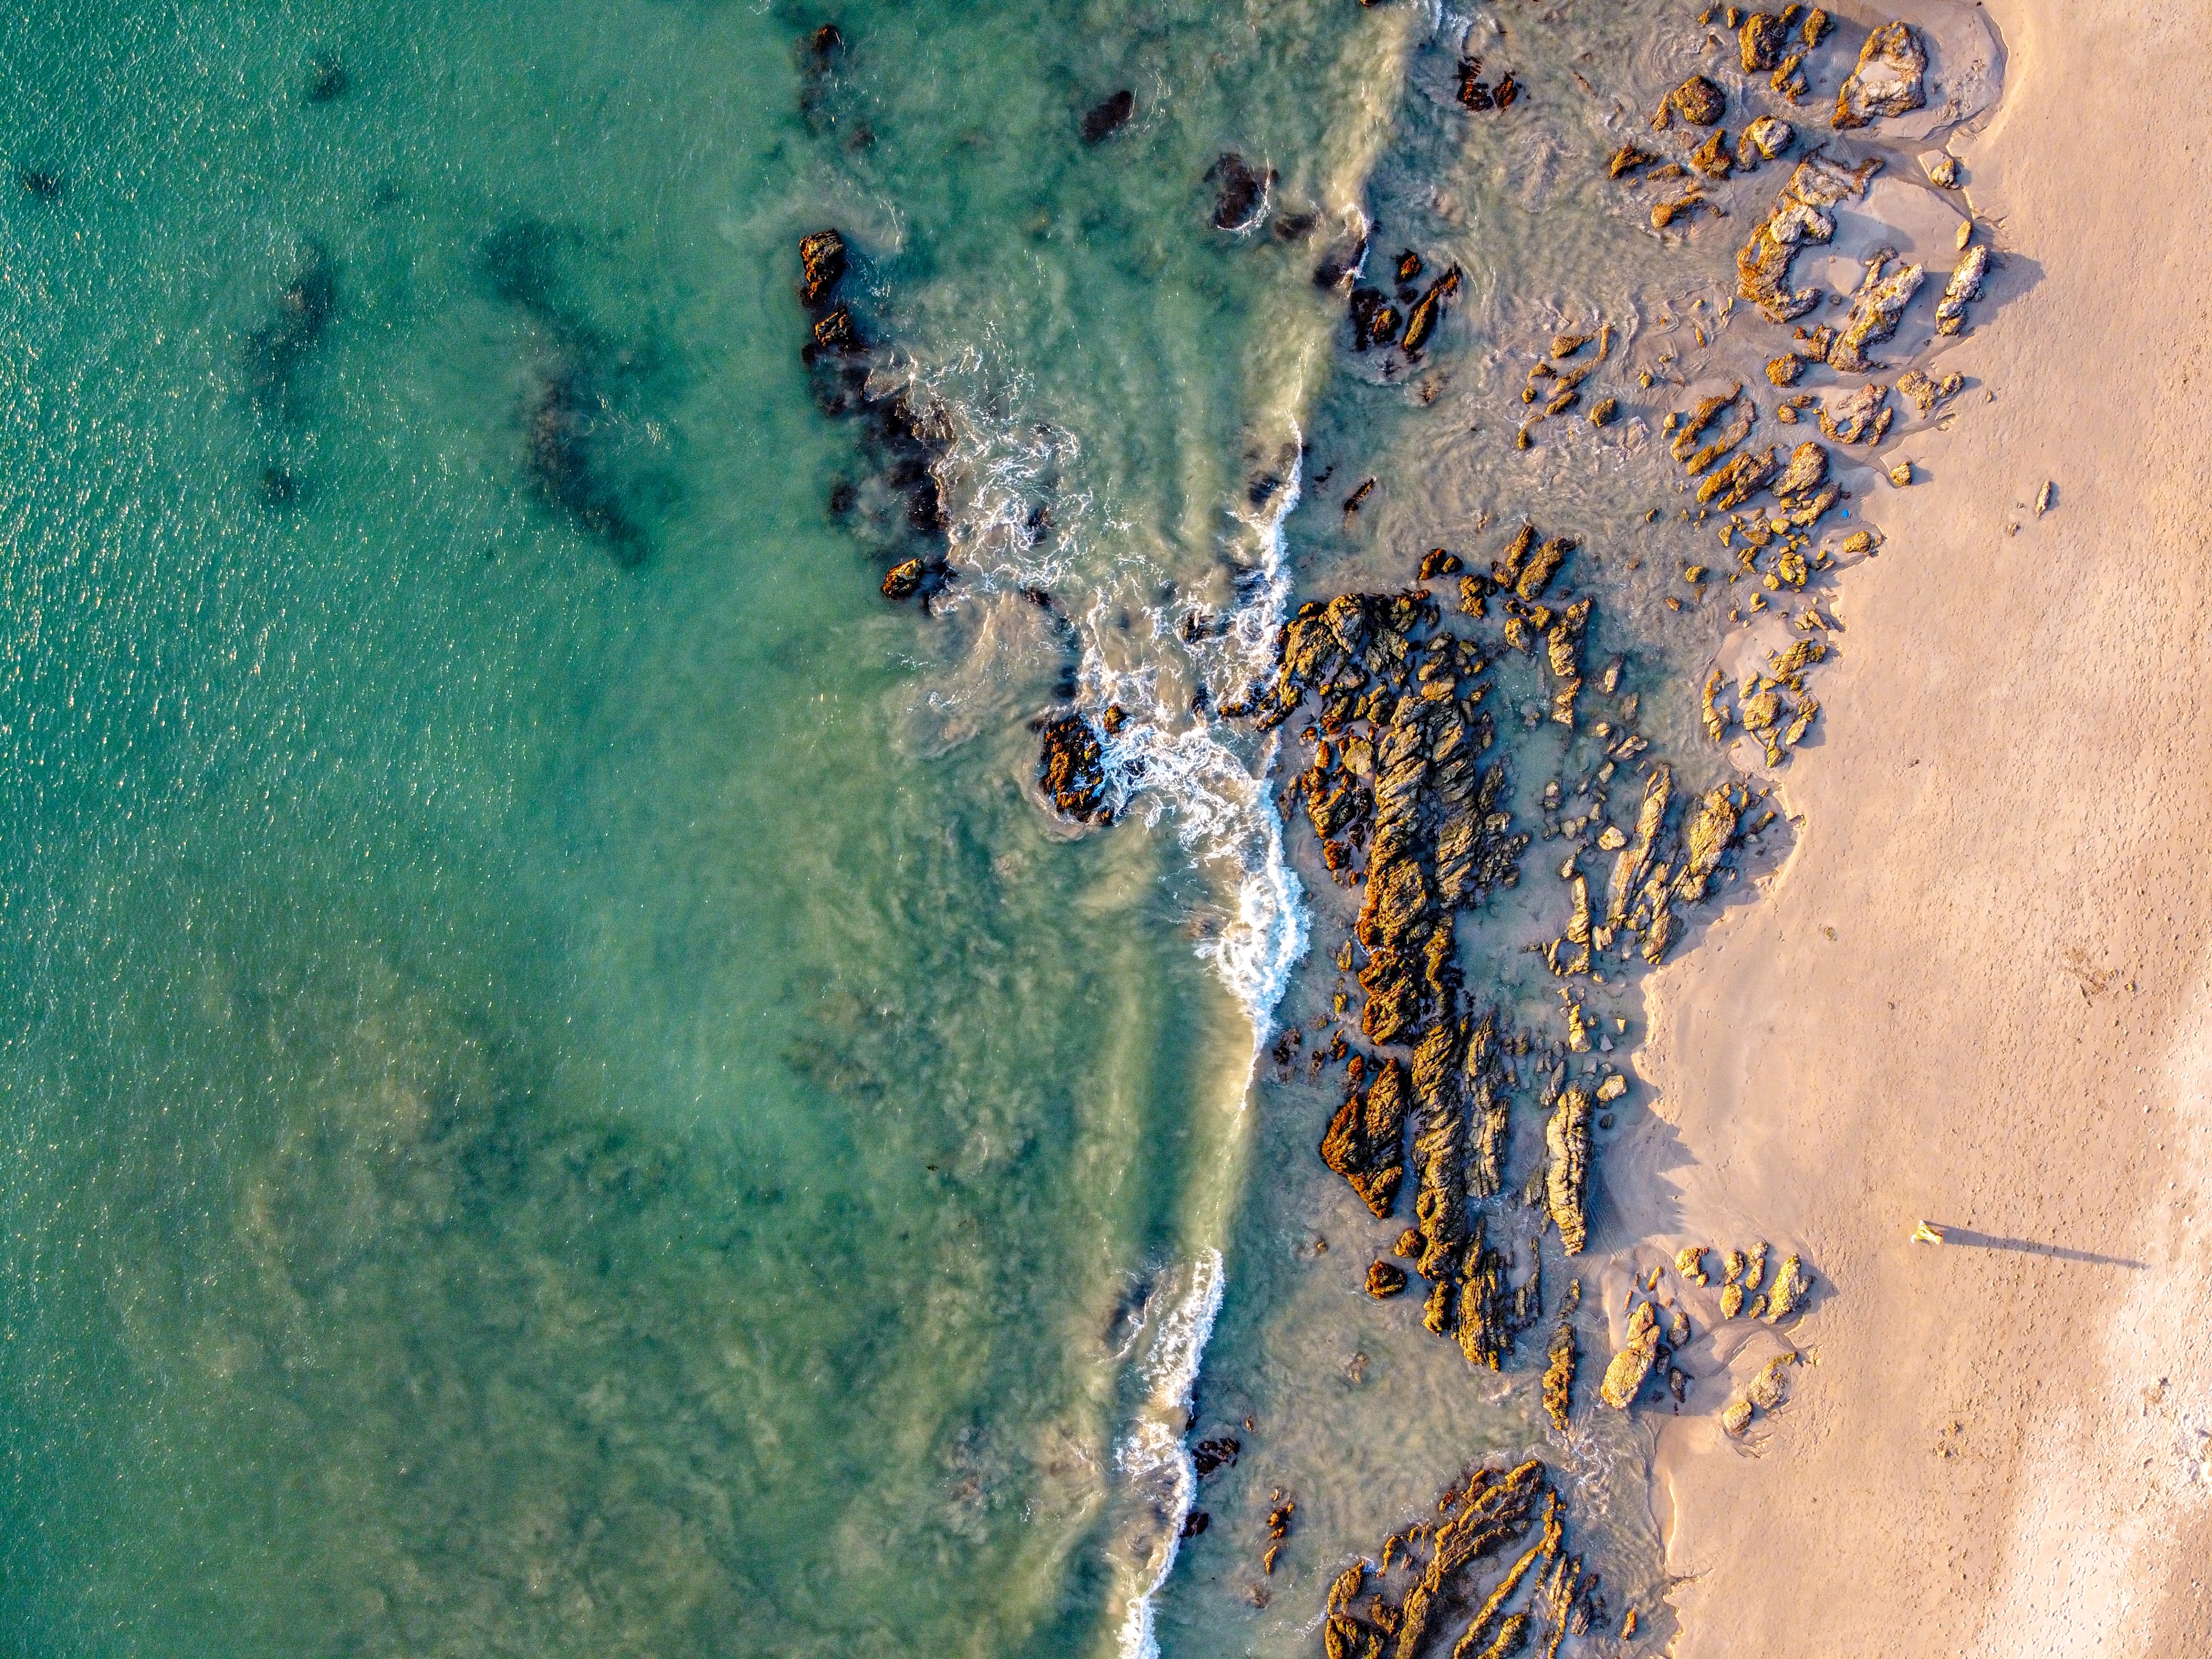 view from above, nature, sea, beach, rocks, coast wallpaper for mobile